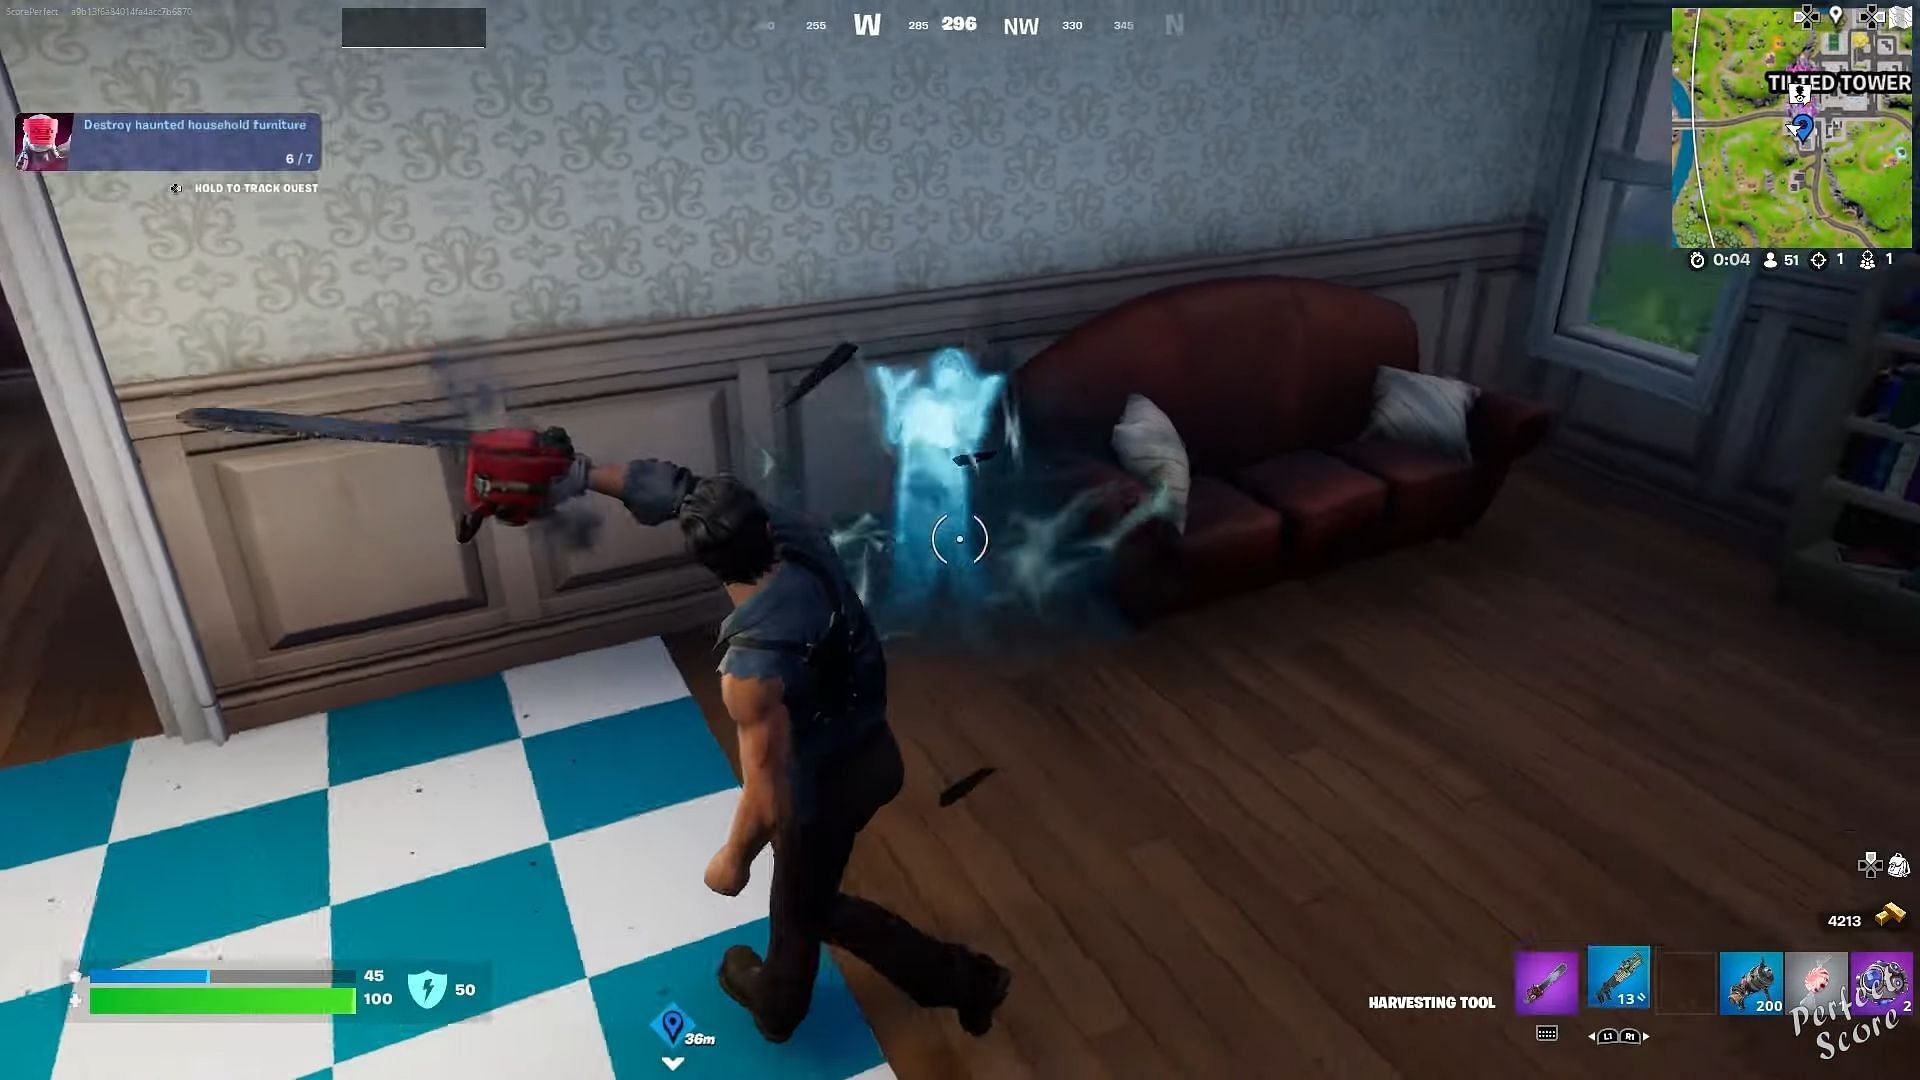 Swing your pickaxe to destroy Haunted furniture (Image via Epic Games)